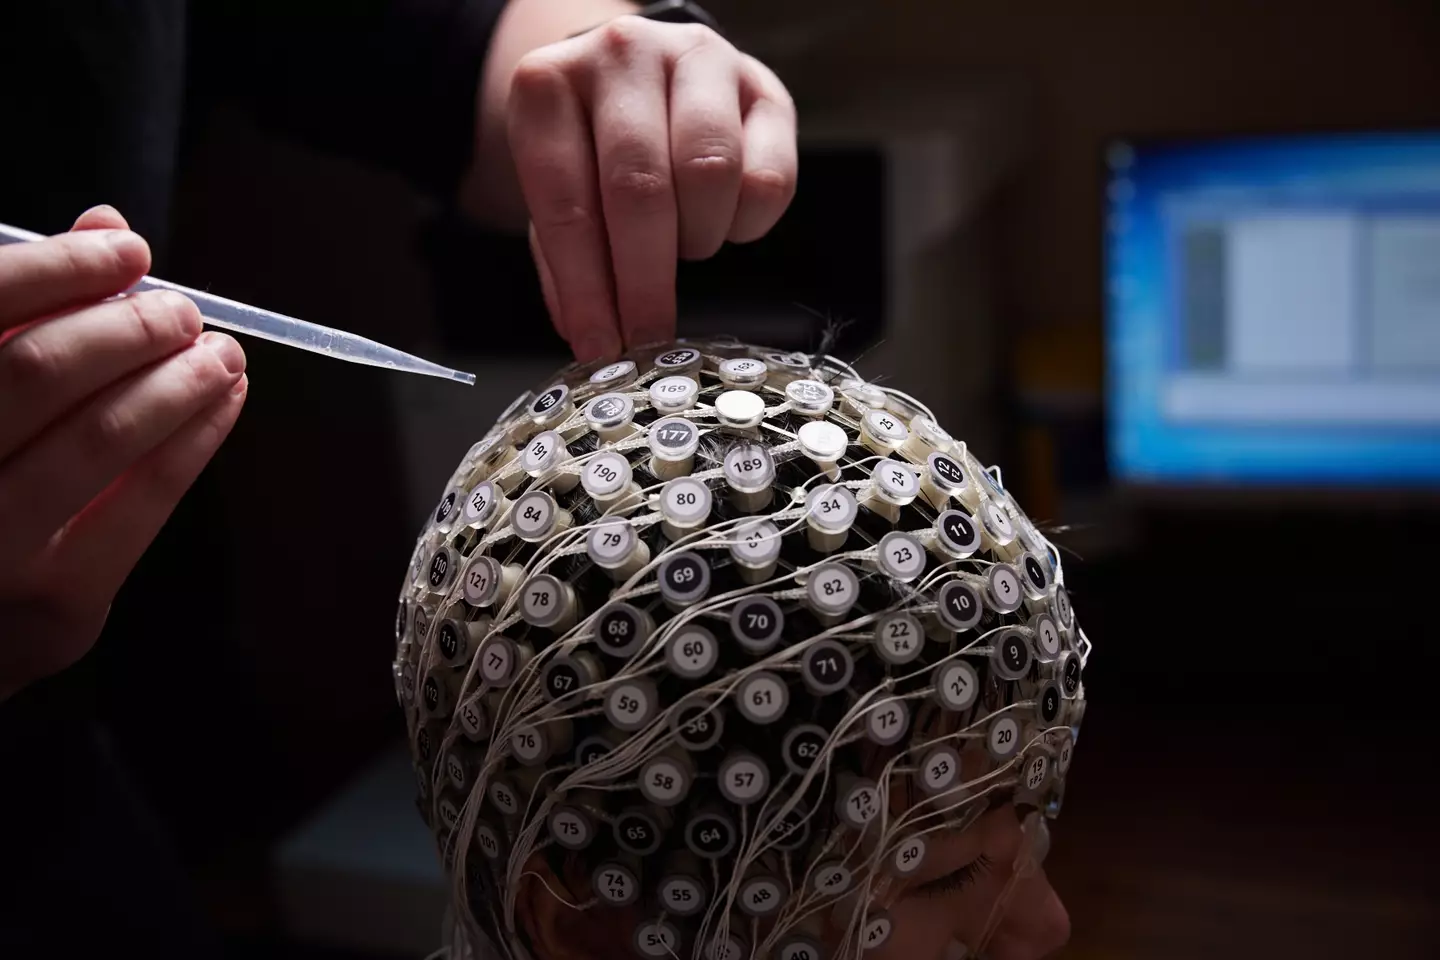 Doctors used an EEG to monitor the man's brain.